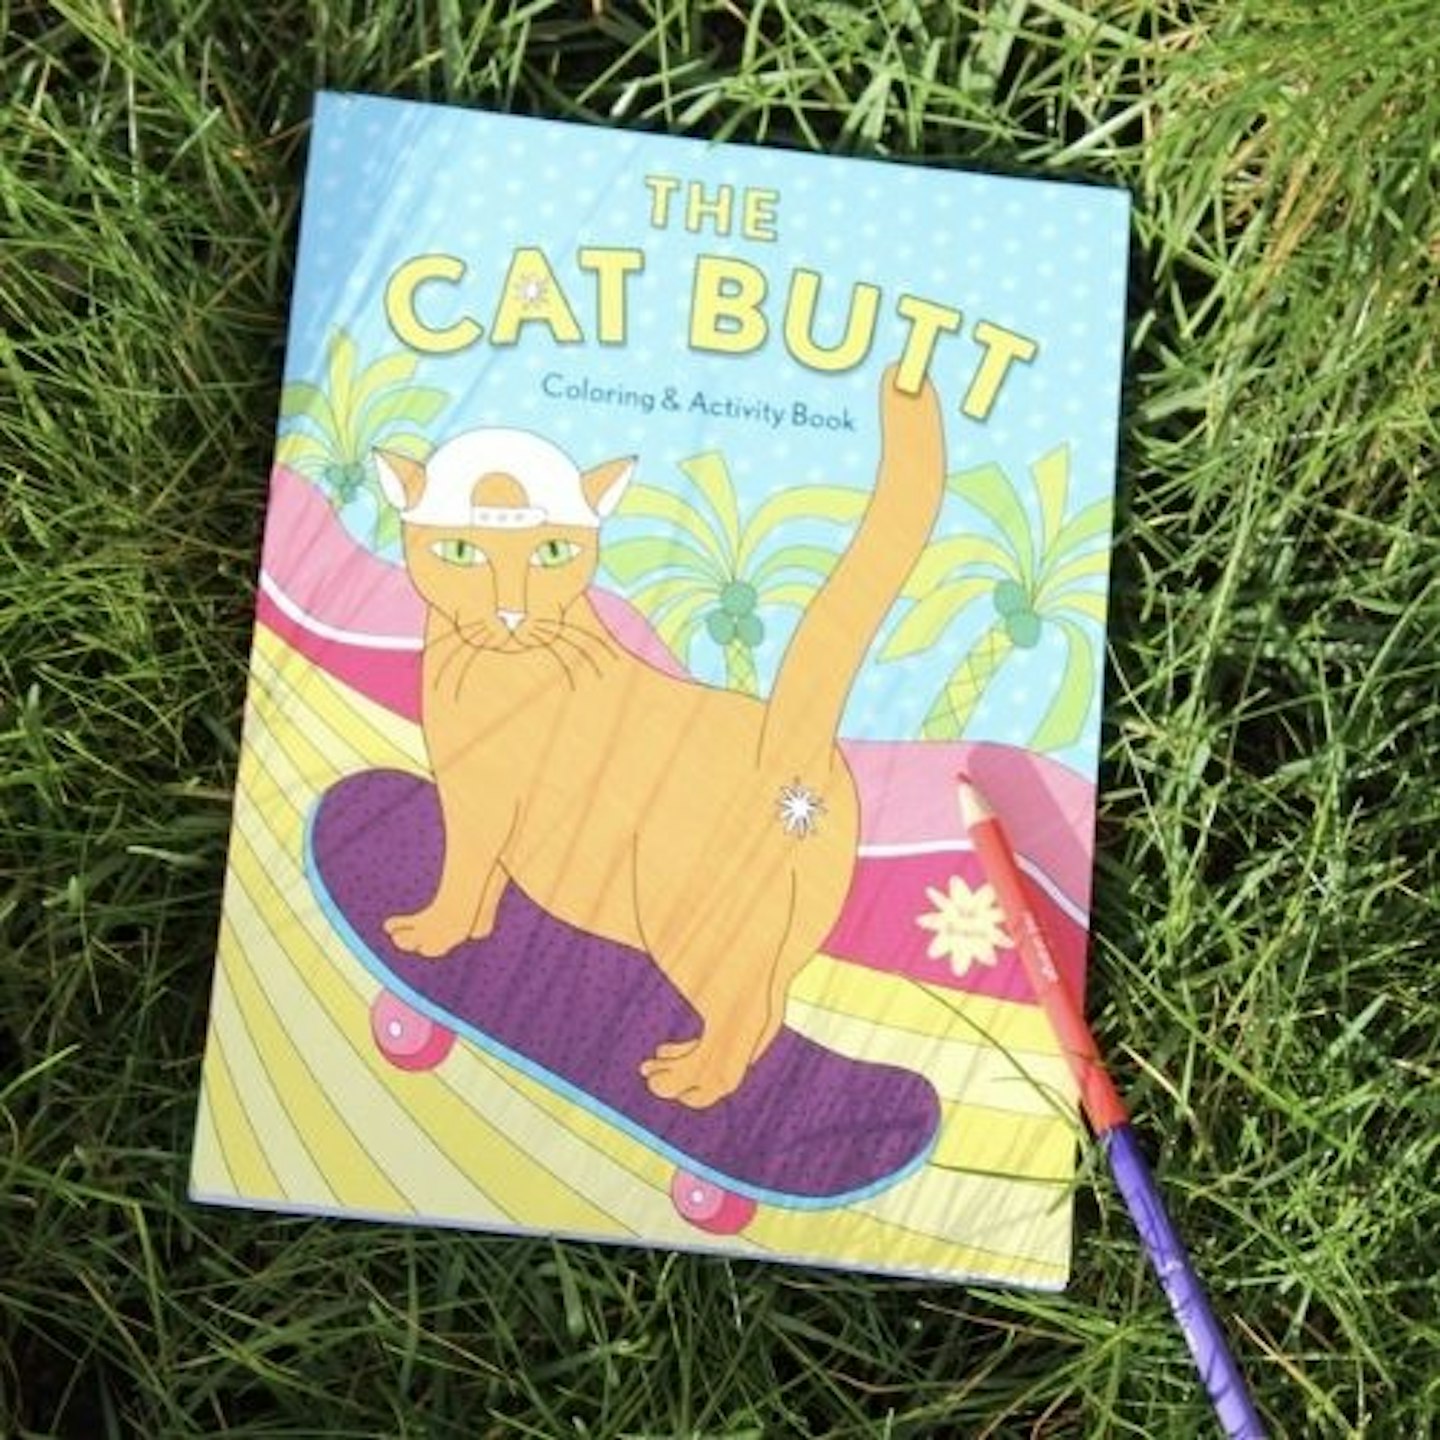 The cat butt colouring and activity book